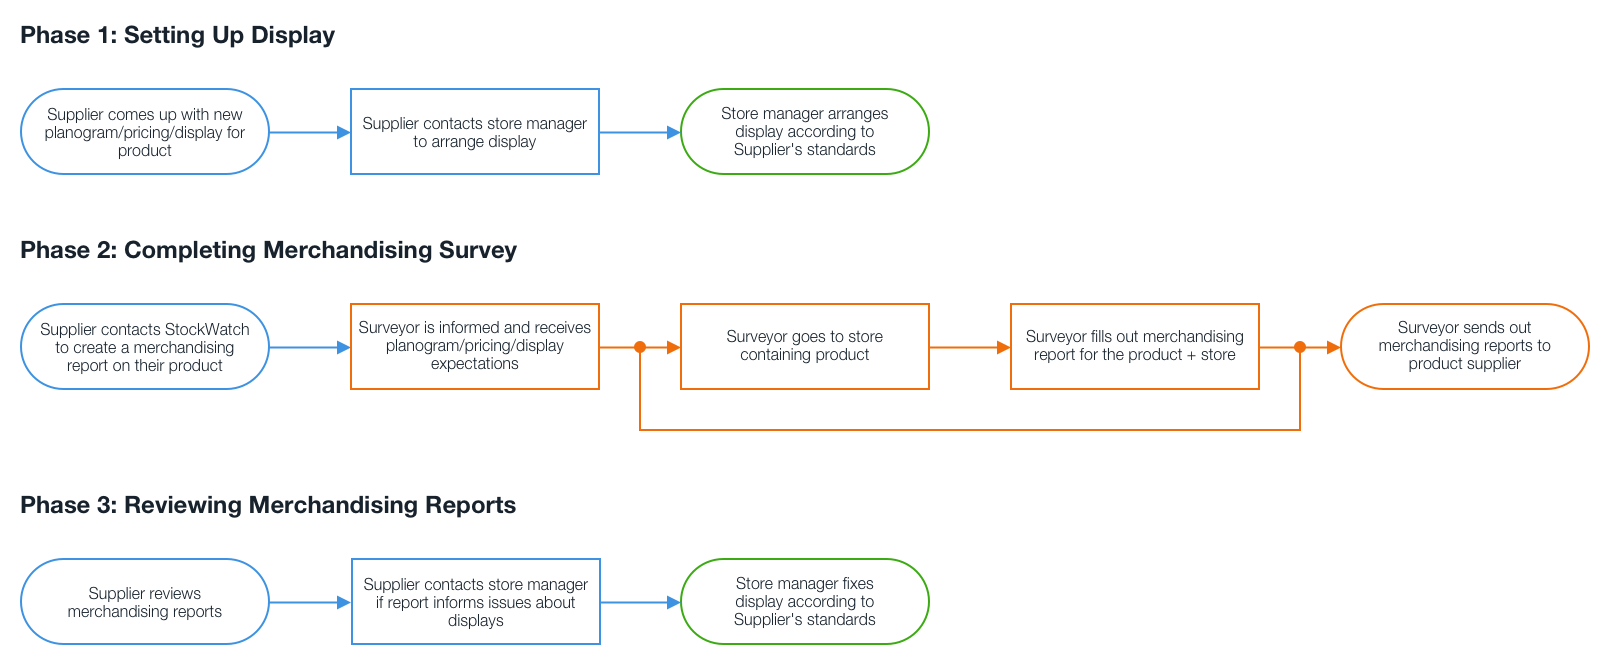 Flowchart of the current process that has 3 phases.